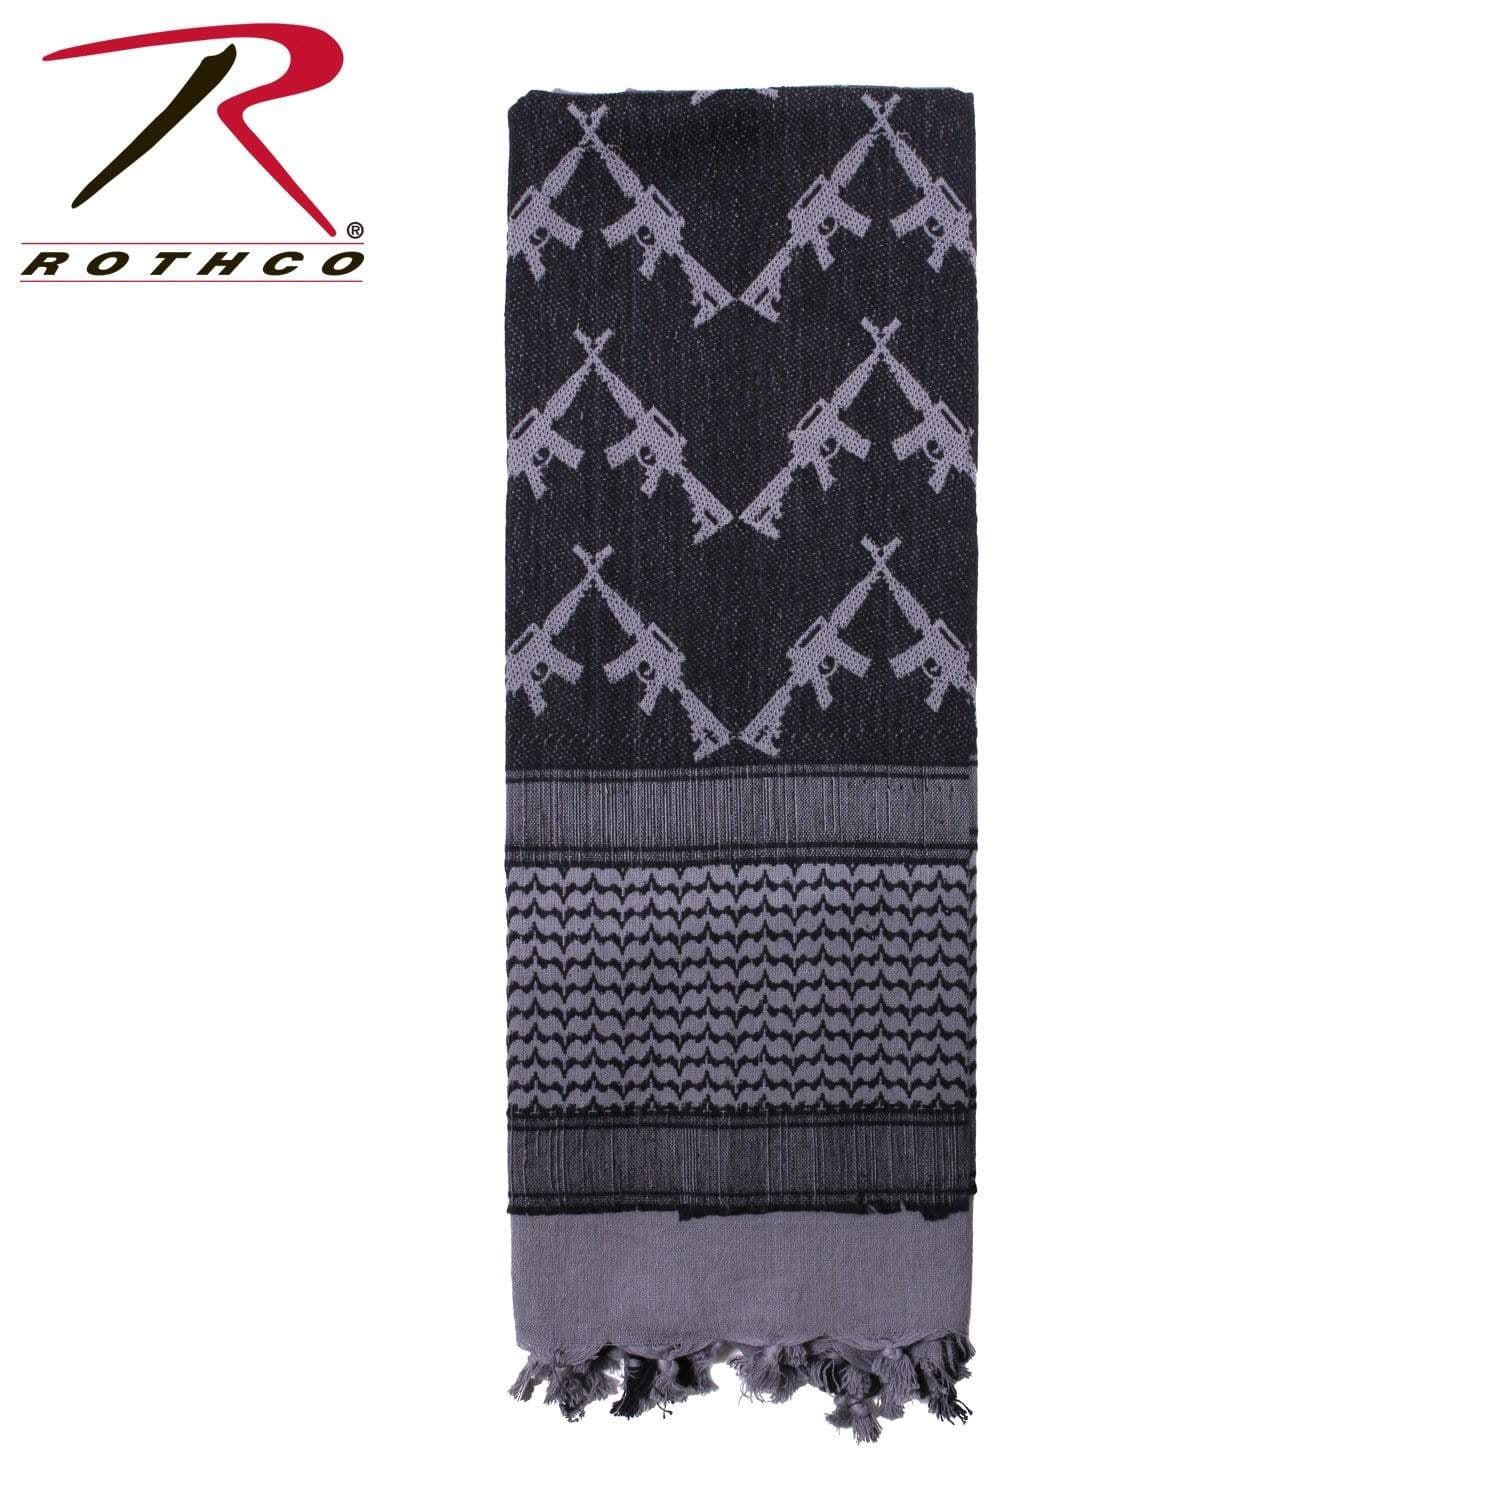 Rothco Crossed Rifles Shemagh Tactical Desert Keffiyeh Scarf - Grey - Eminent Paintball And Airsoft